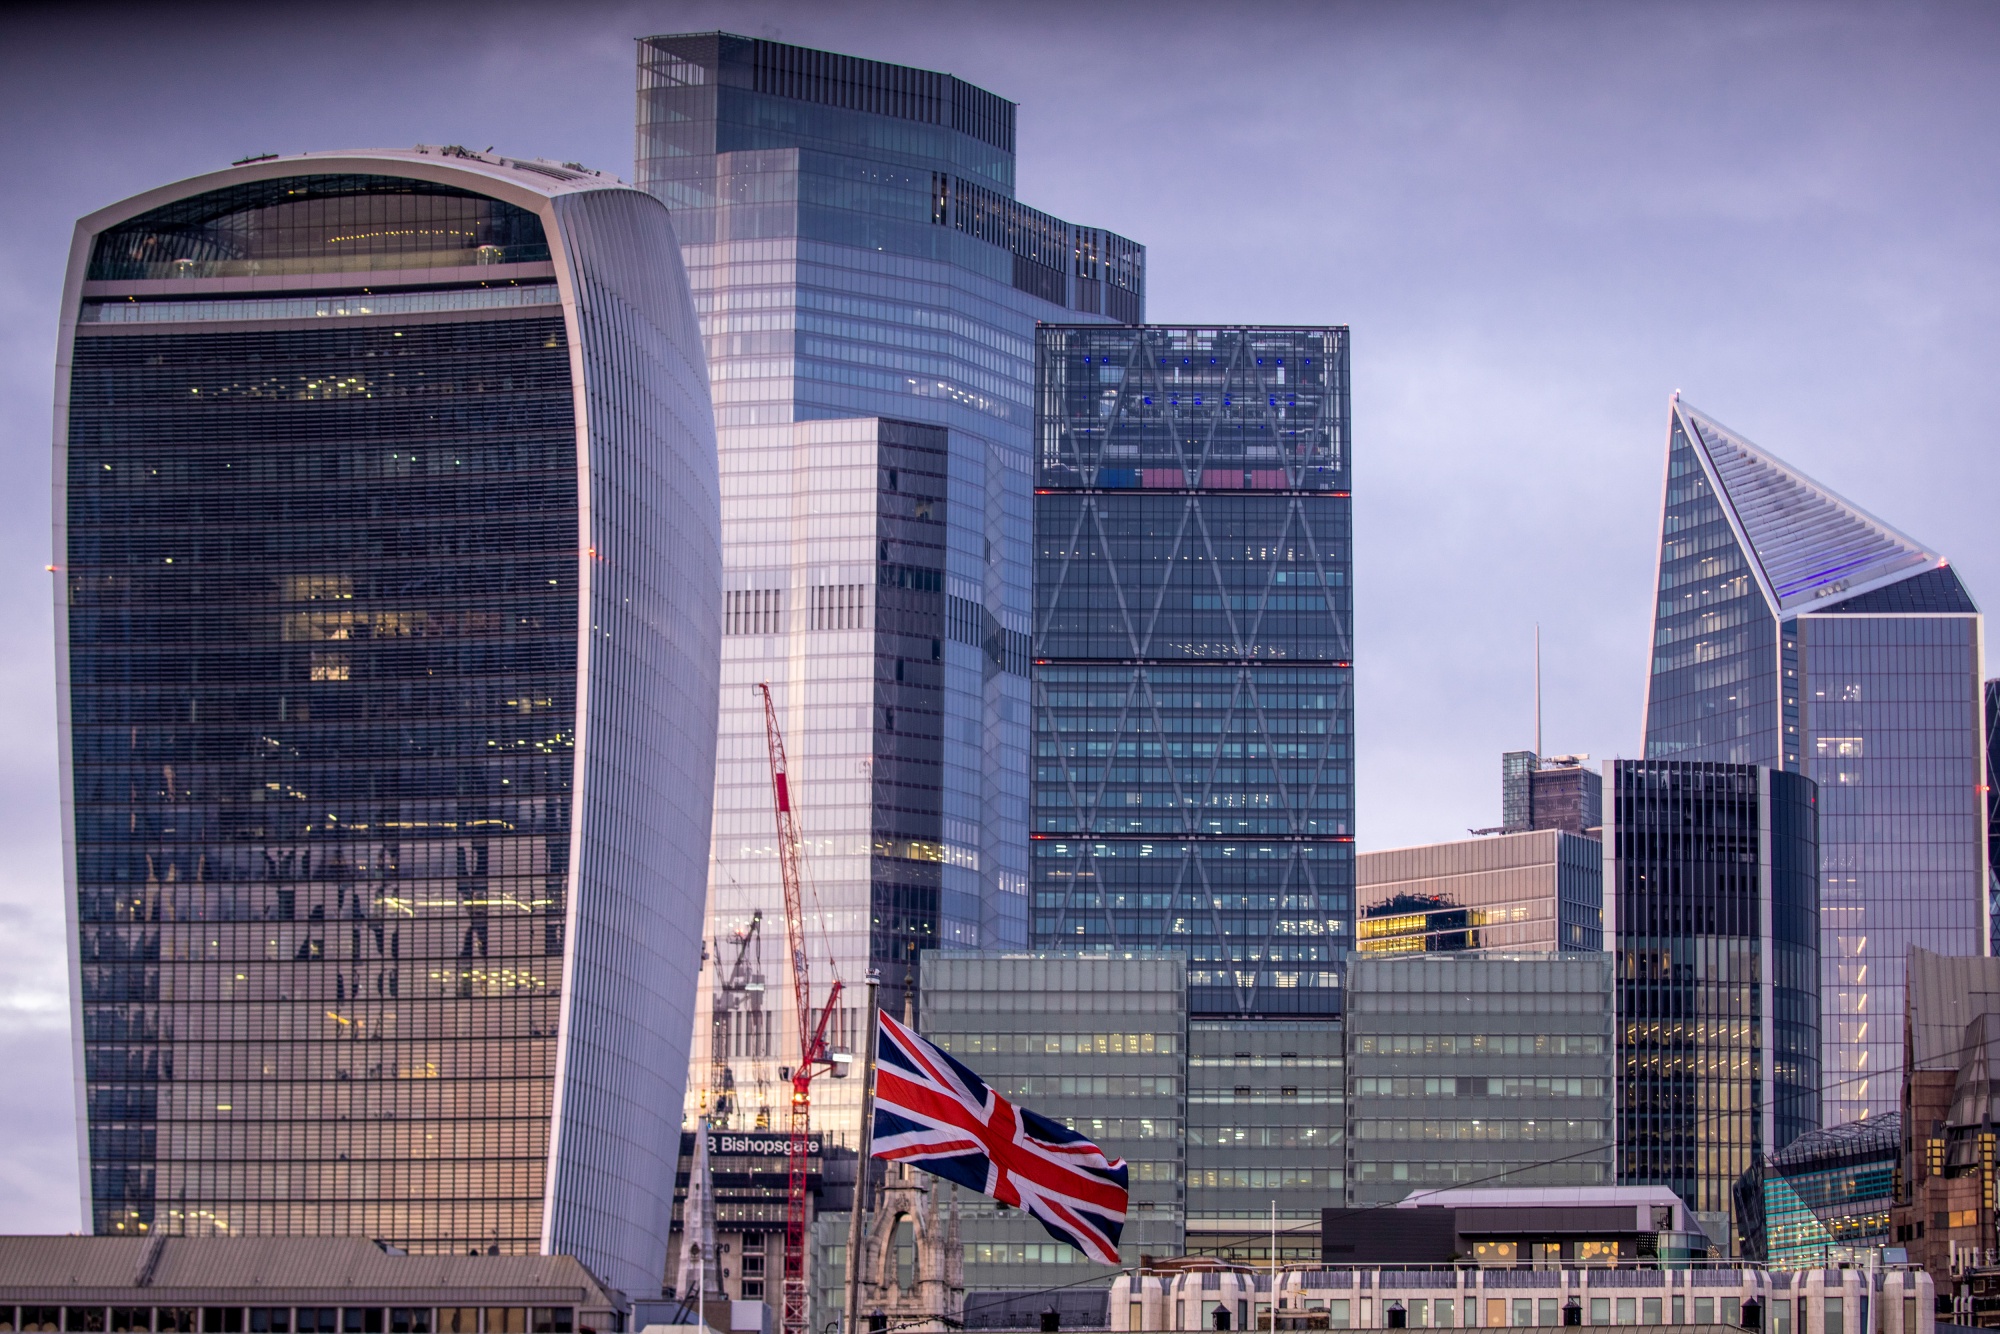 A British Union flag flies in view of skyscrapers in the City of London.